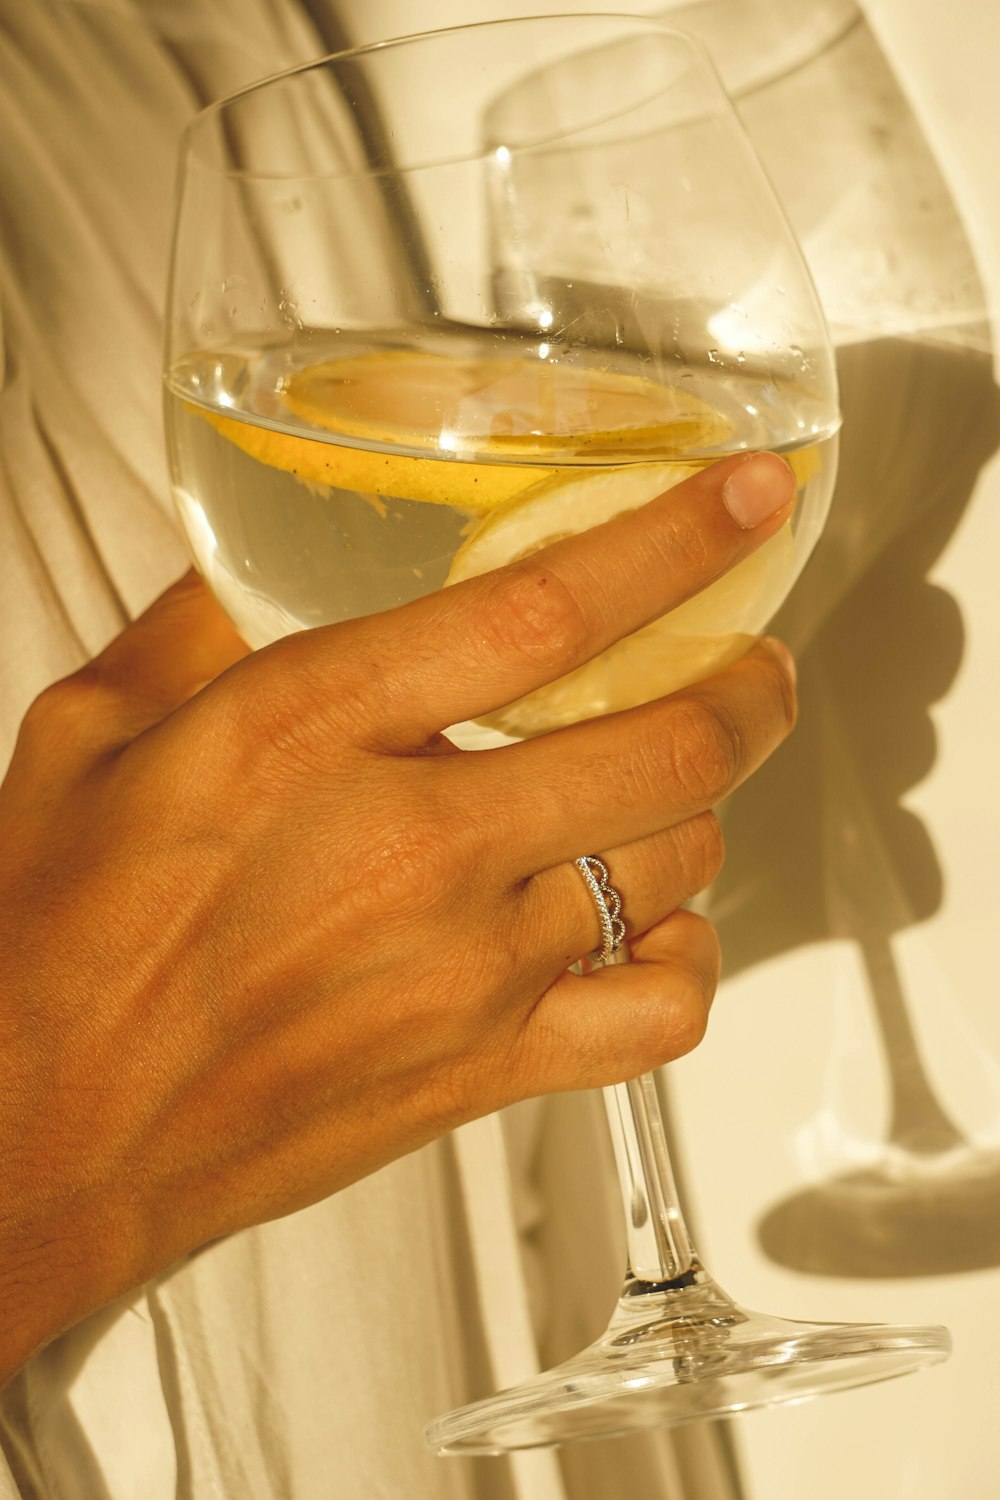 a person holding a glass of wine with a slice of lemon in it